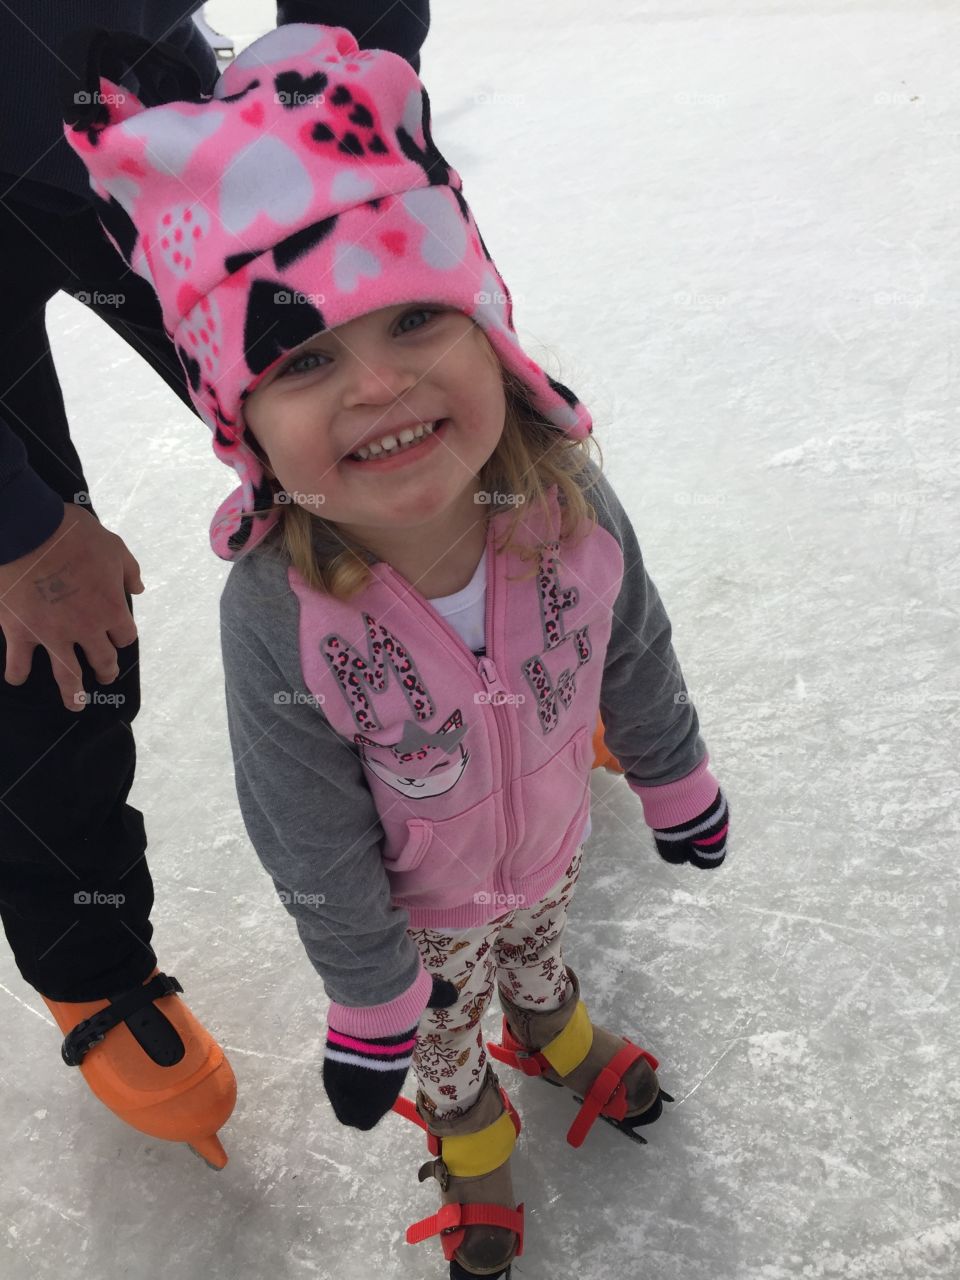 First time ice skating and loving it! 